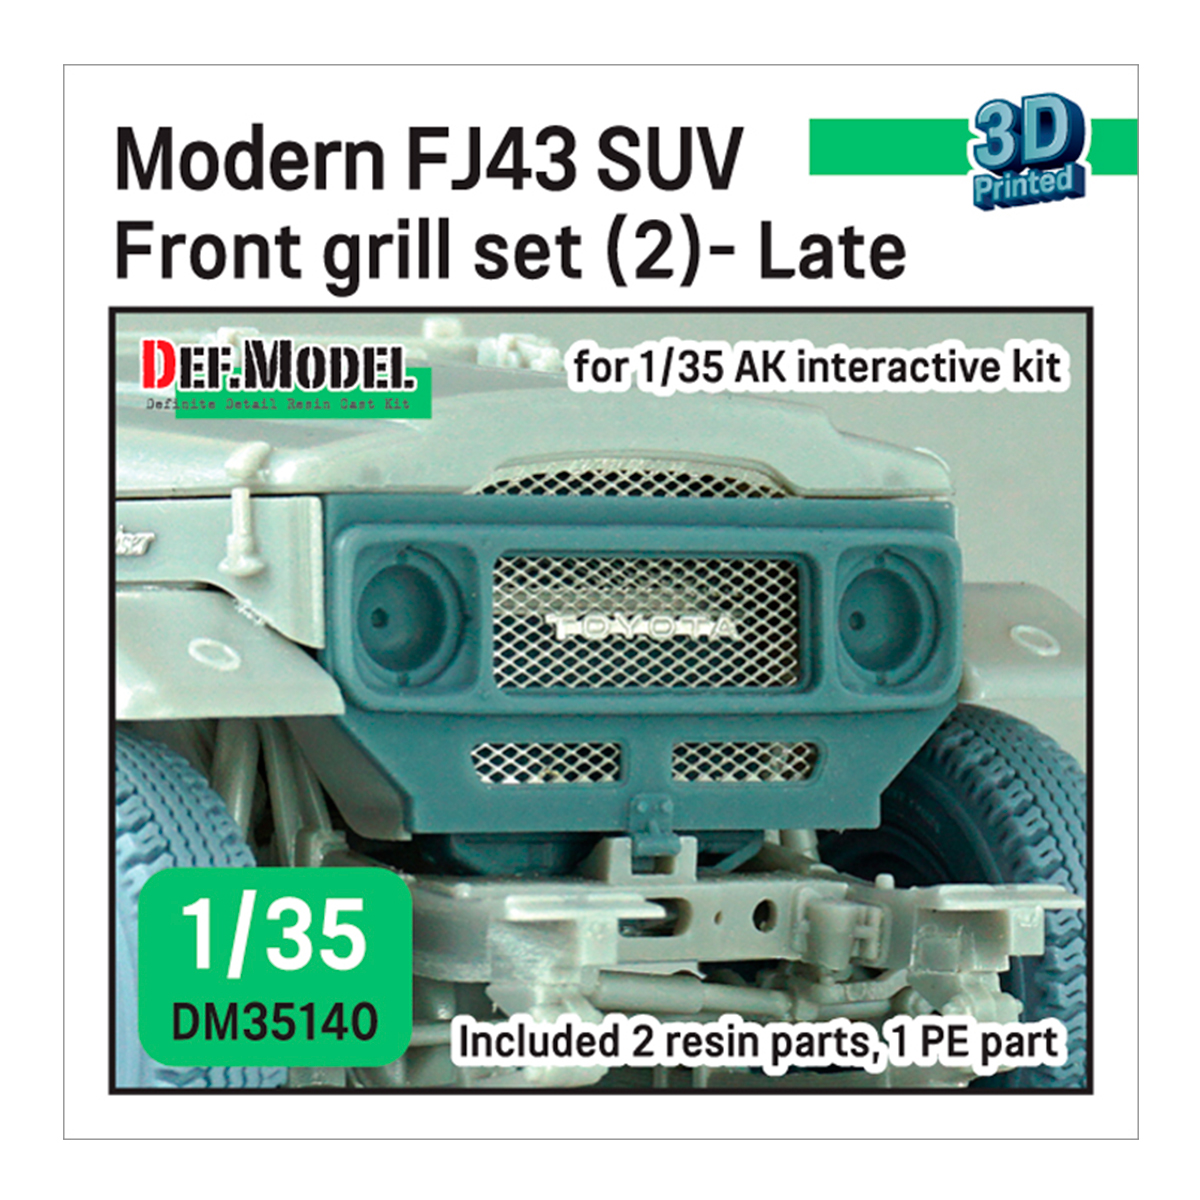 FJ43 front grill set (2) Late (for 1/35 AK Interactive kit)